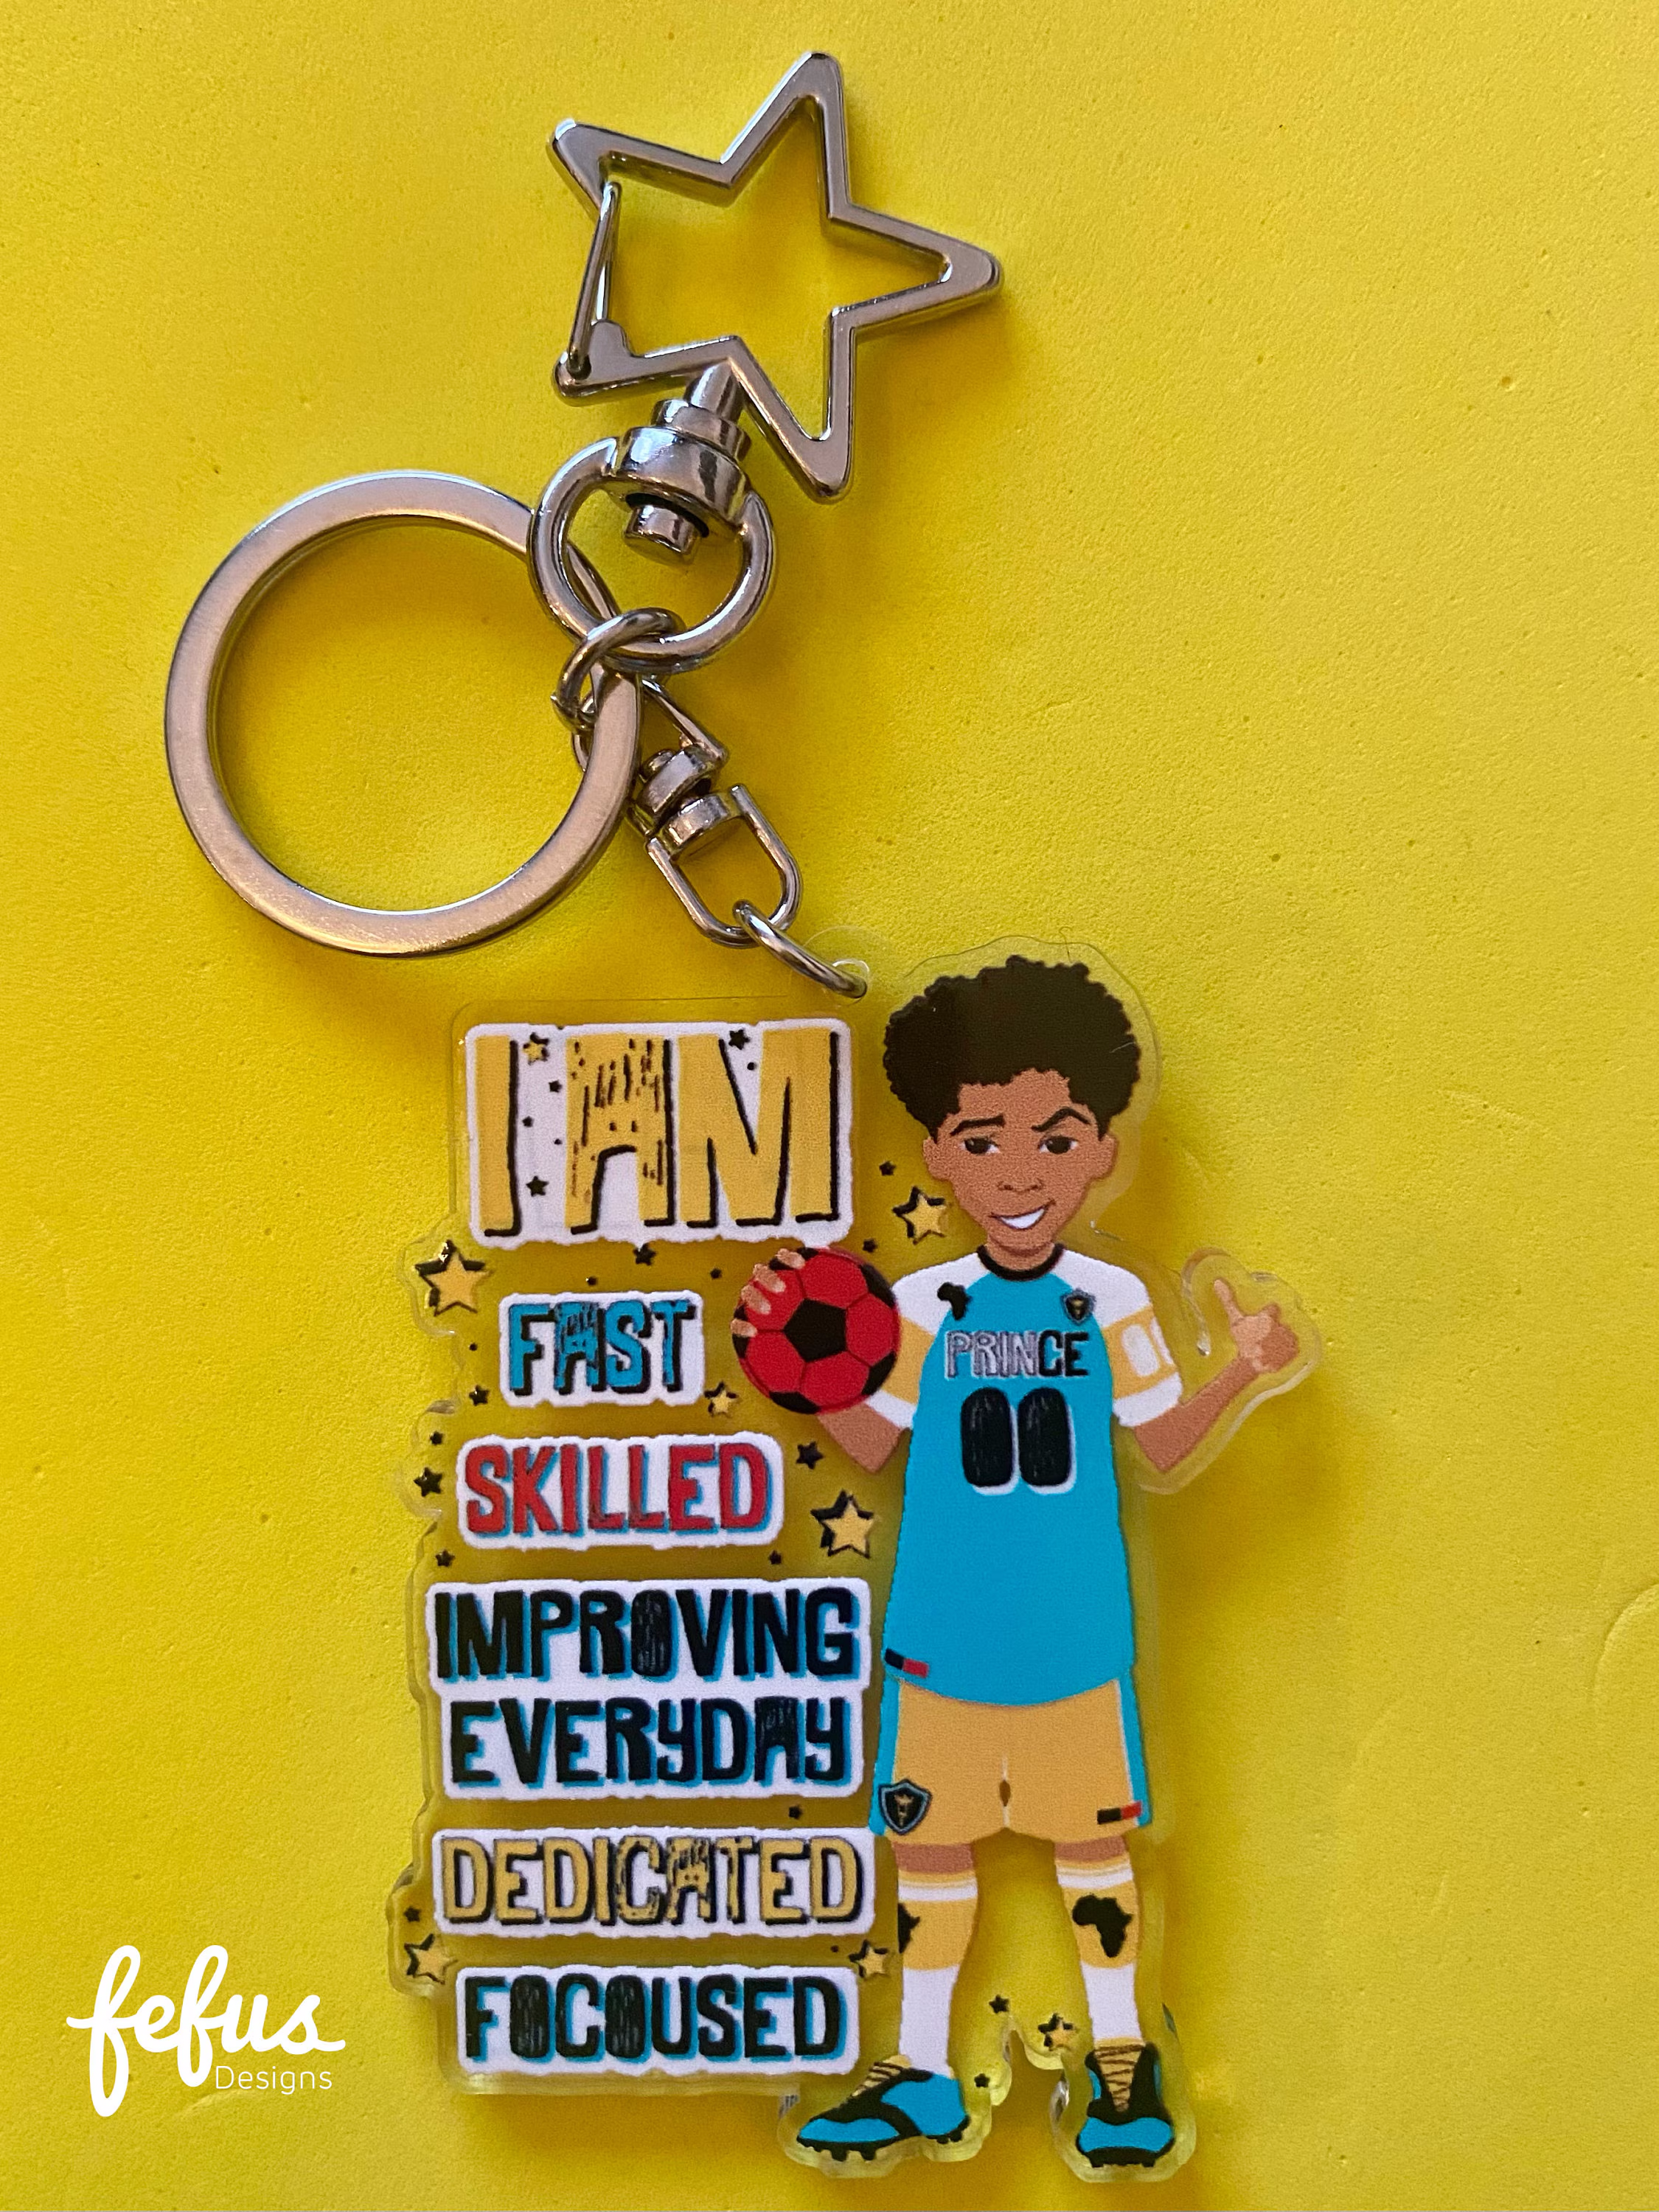 Colorful bag charm featuring a hand-drawn illustration of a biracial boy playing football. Made in the UK from sturdy clear acrylic with a double-sided design. (Biracial Boy Footballer Keyring, 2.5 inches)